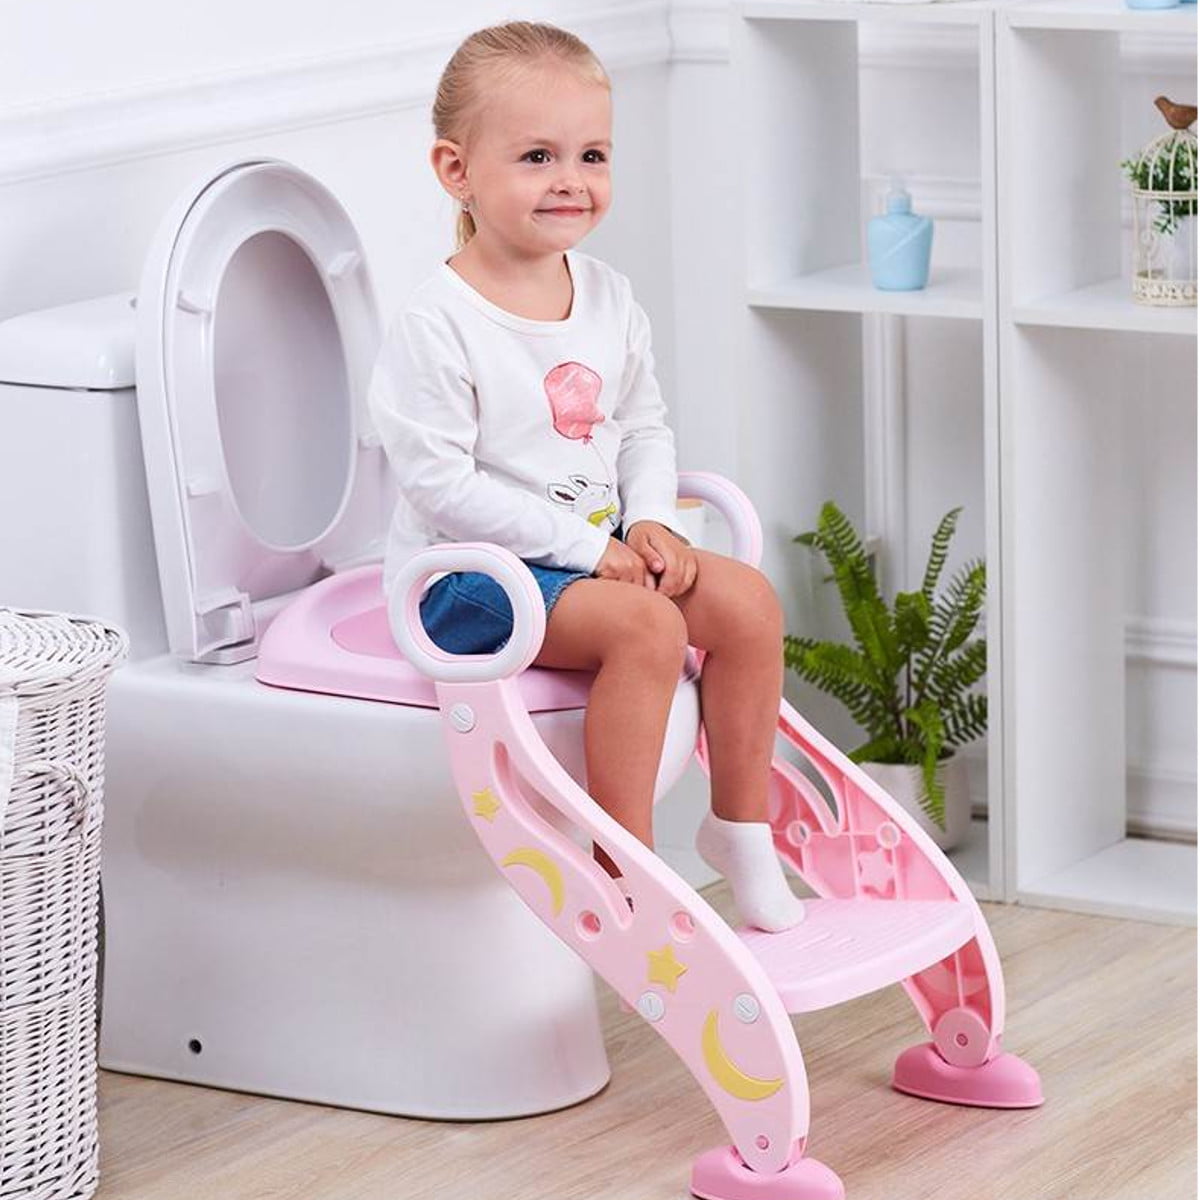 Baby Potty Seat Kids Training Safety Toilet Seat with Adjustable Ladder Cushion# 